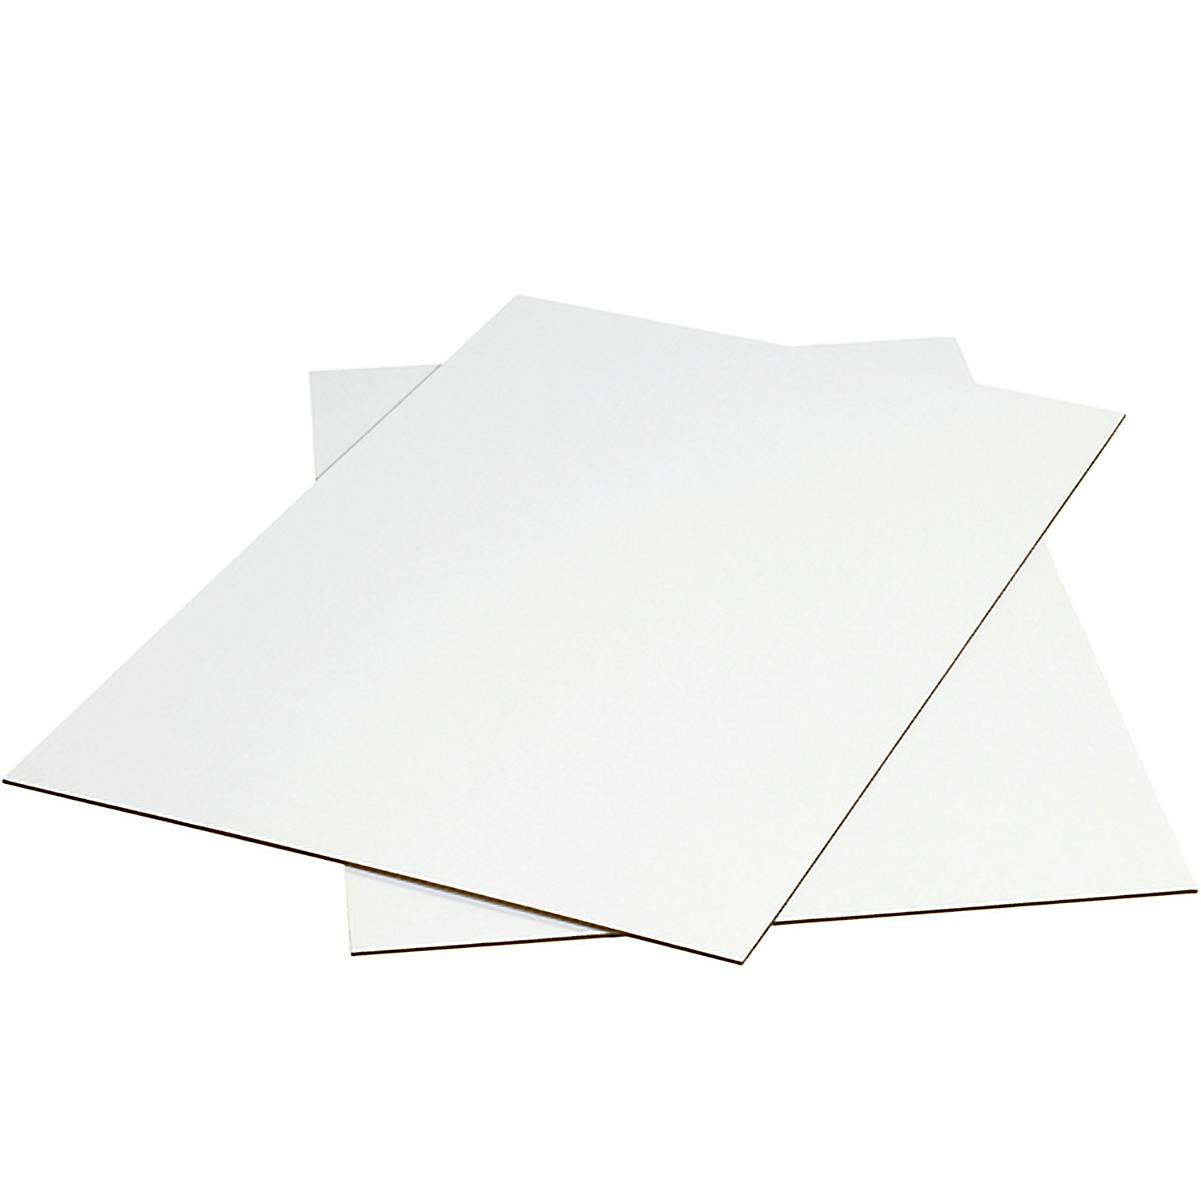 1200mm x 600mm White Cardboard Corrugated Sheets Pads Divider Art Craft  Board-..